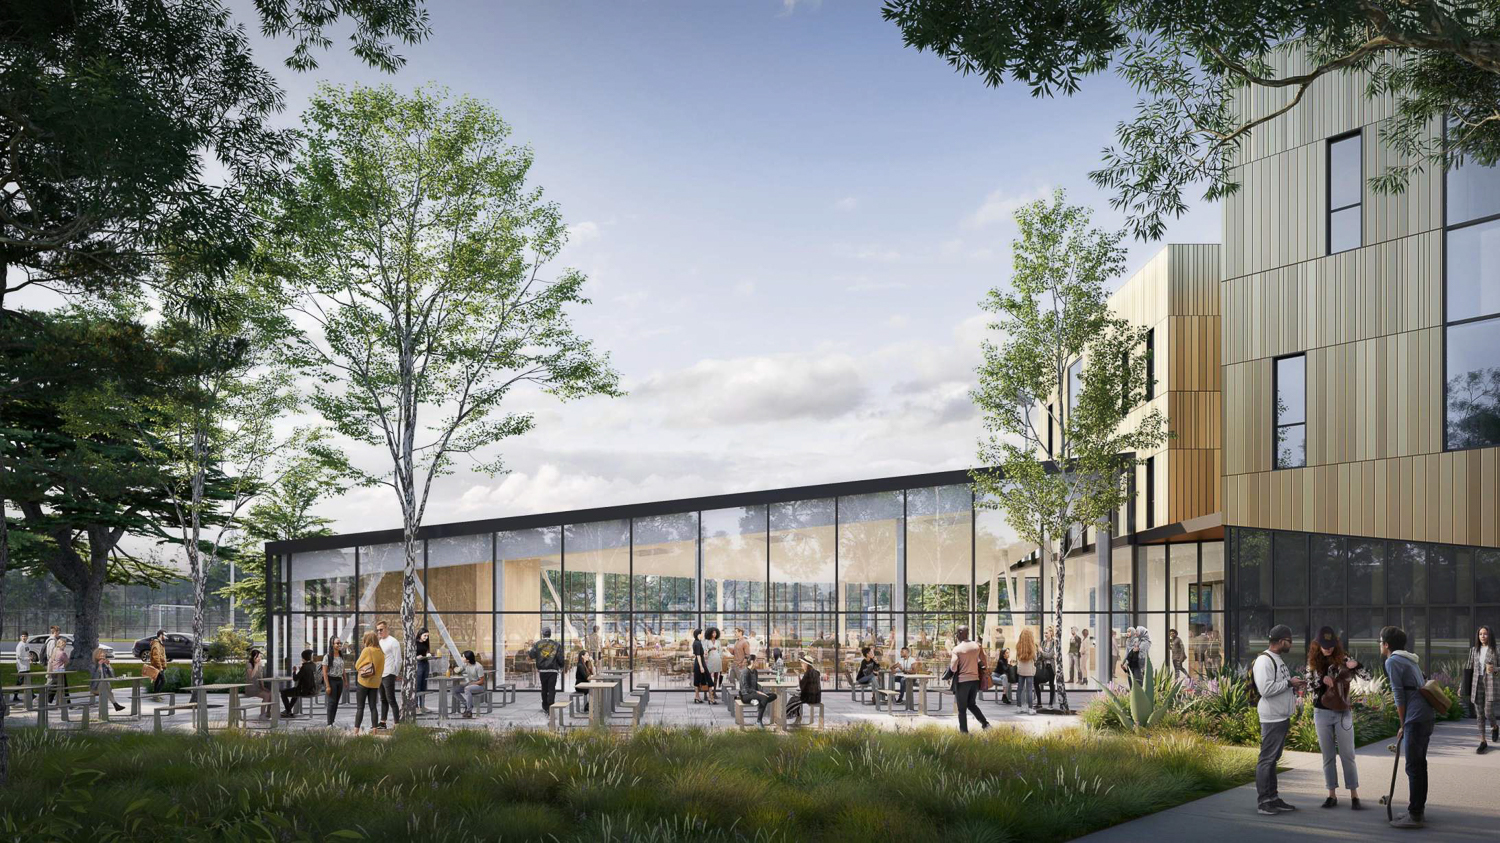 West Campus Green dining center, rendering by EHDD